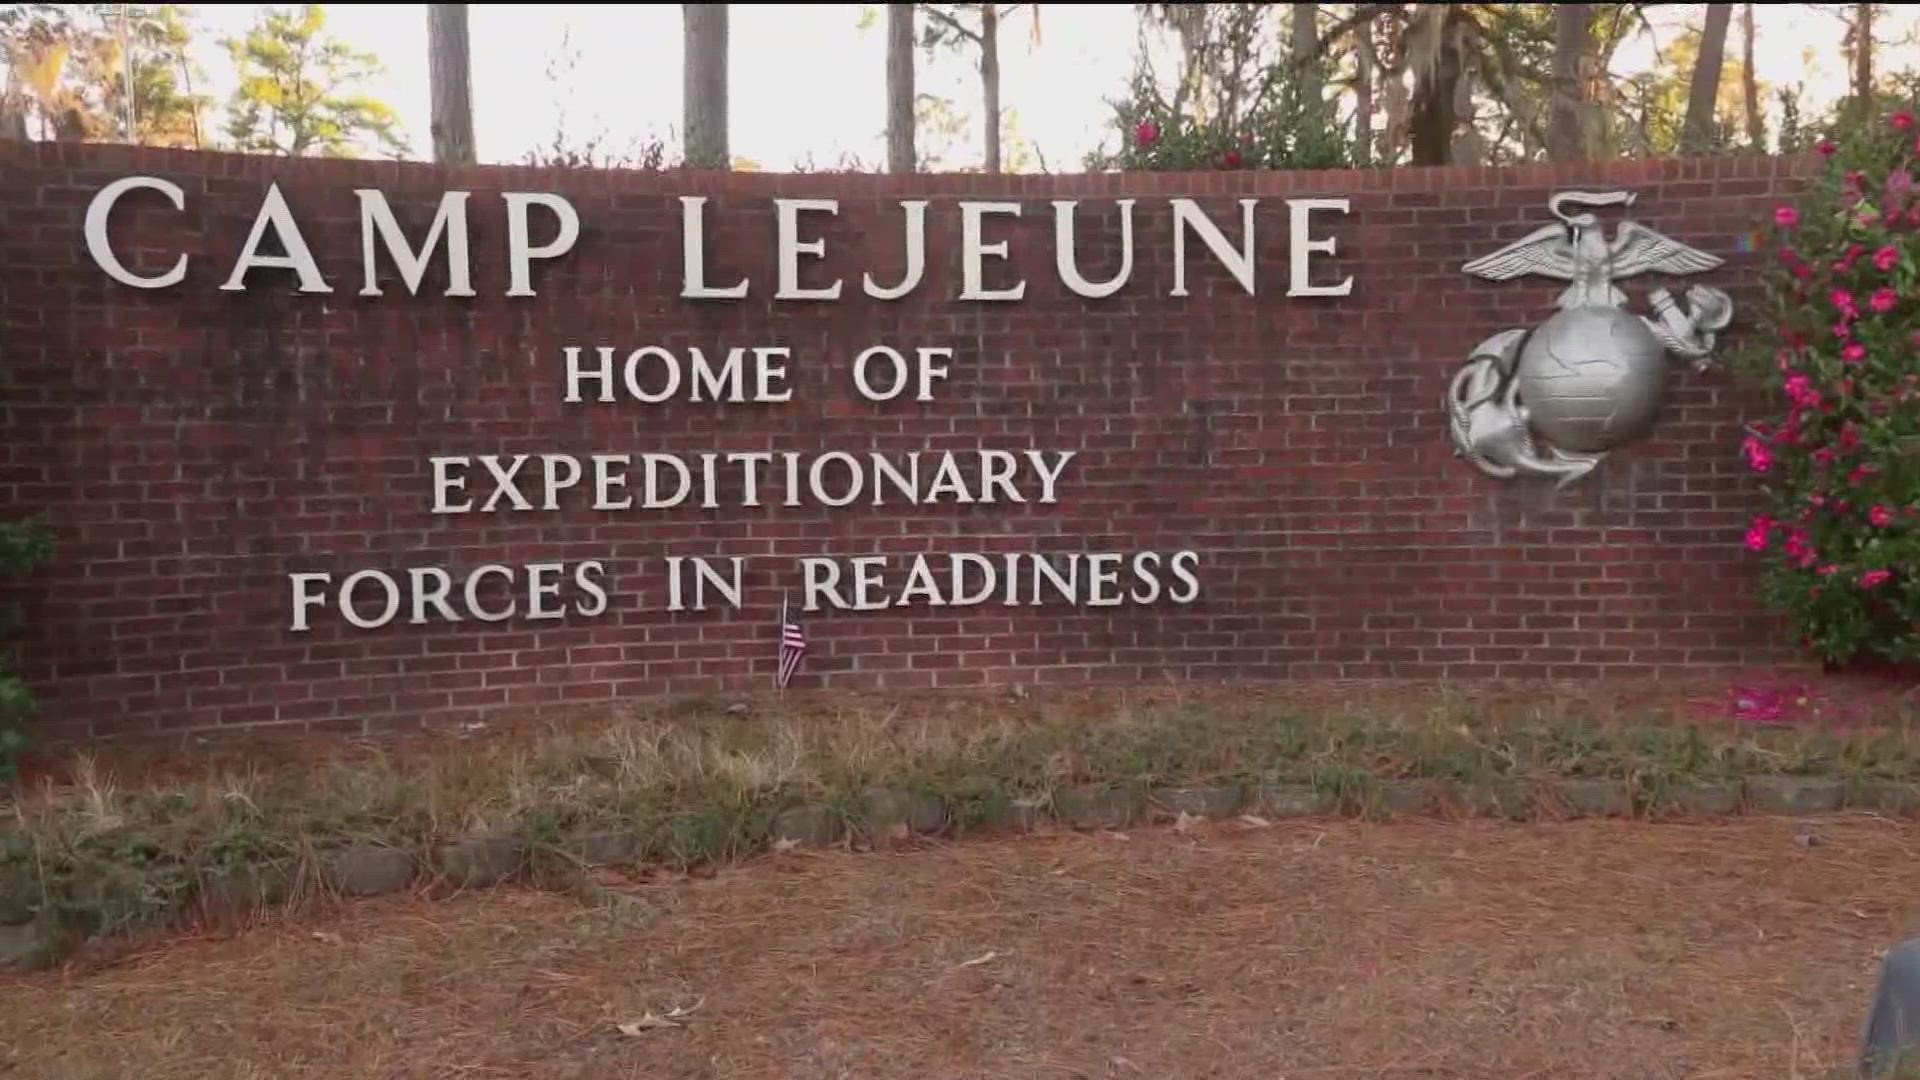 The Camp Lejeune Justice Act may allow as many as a million people to sue the government over contaminated water at Camp Lejeune.